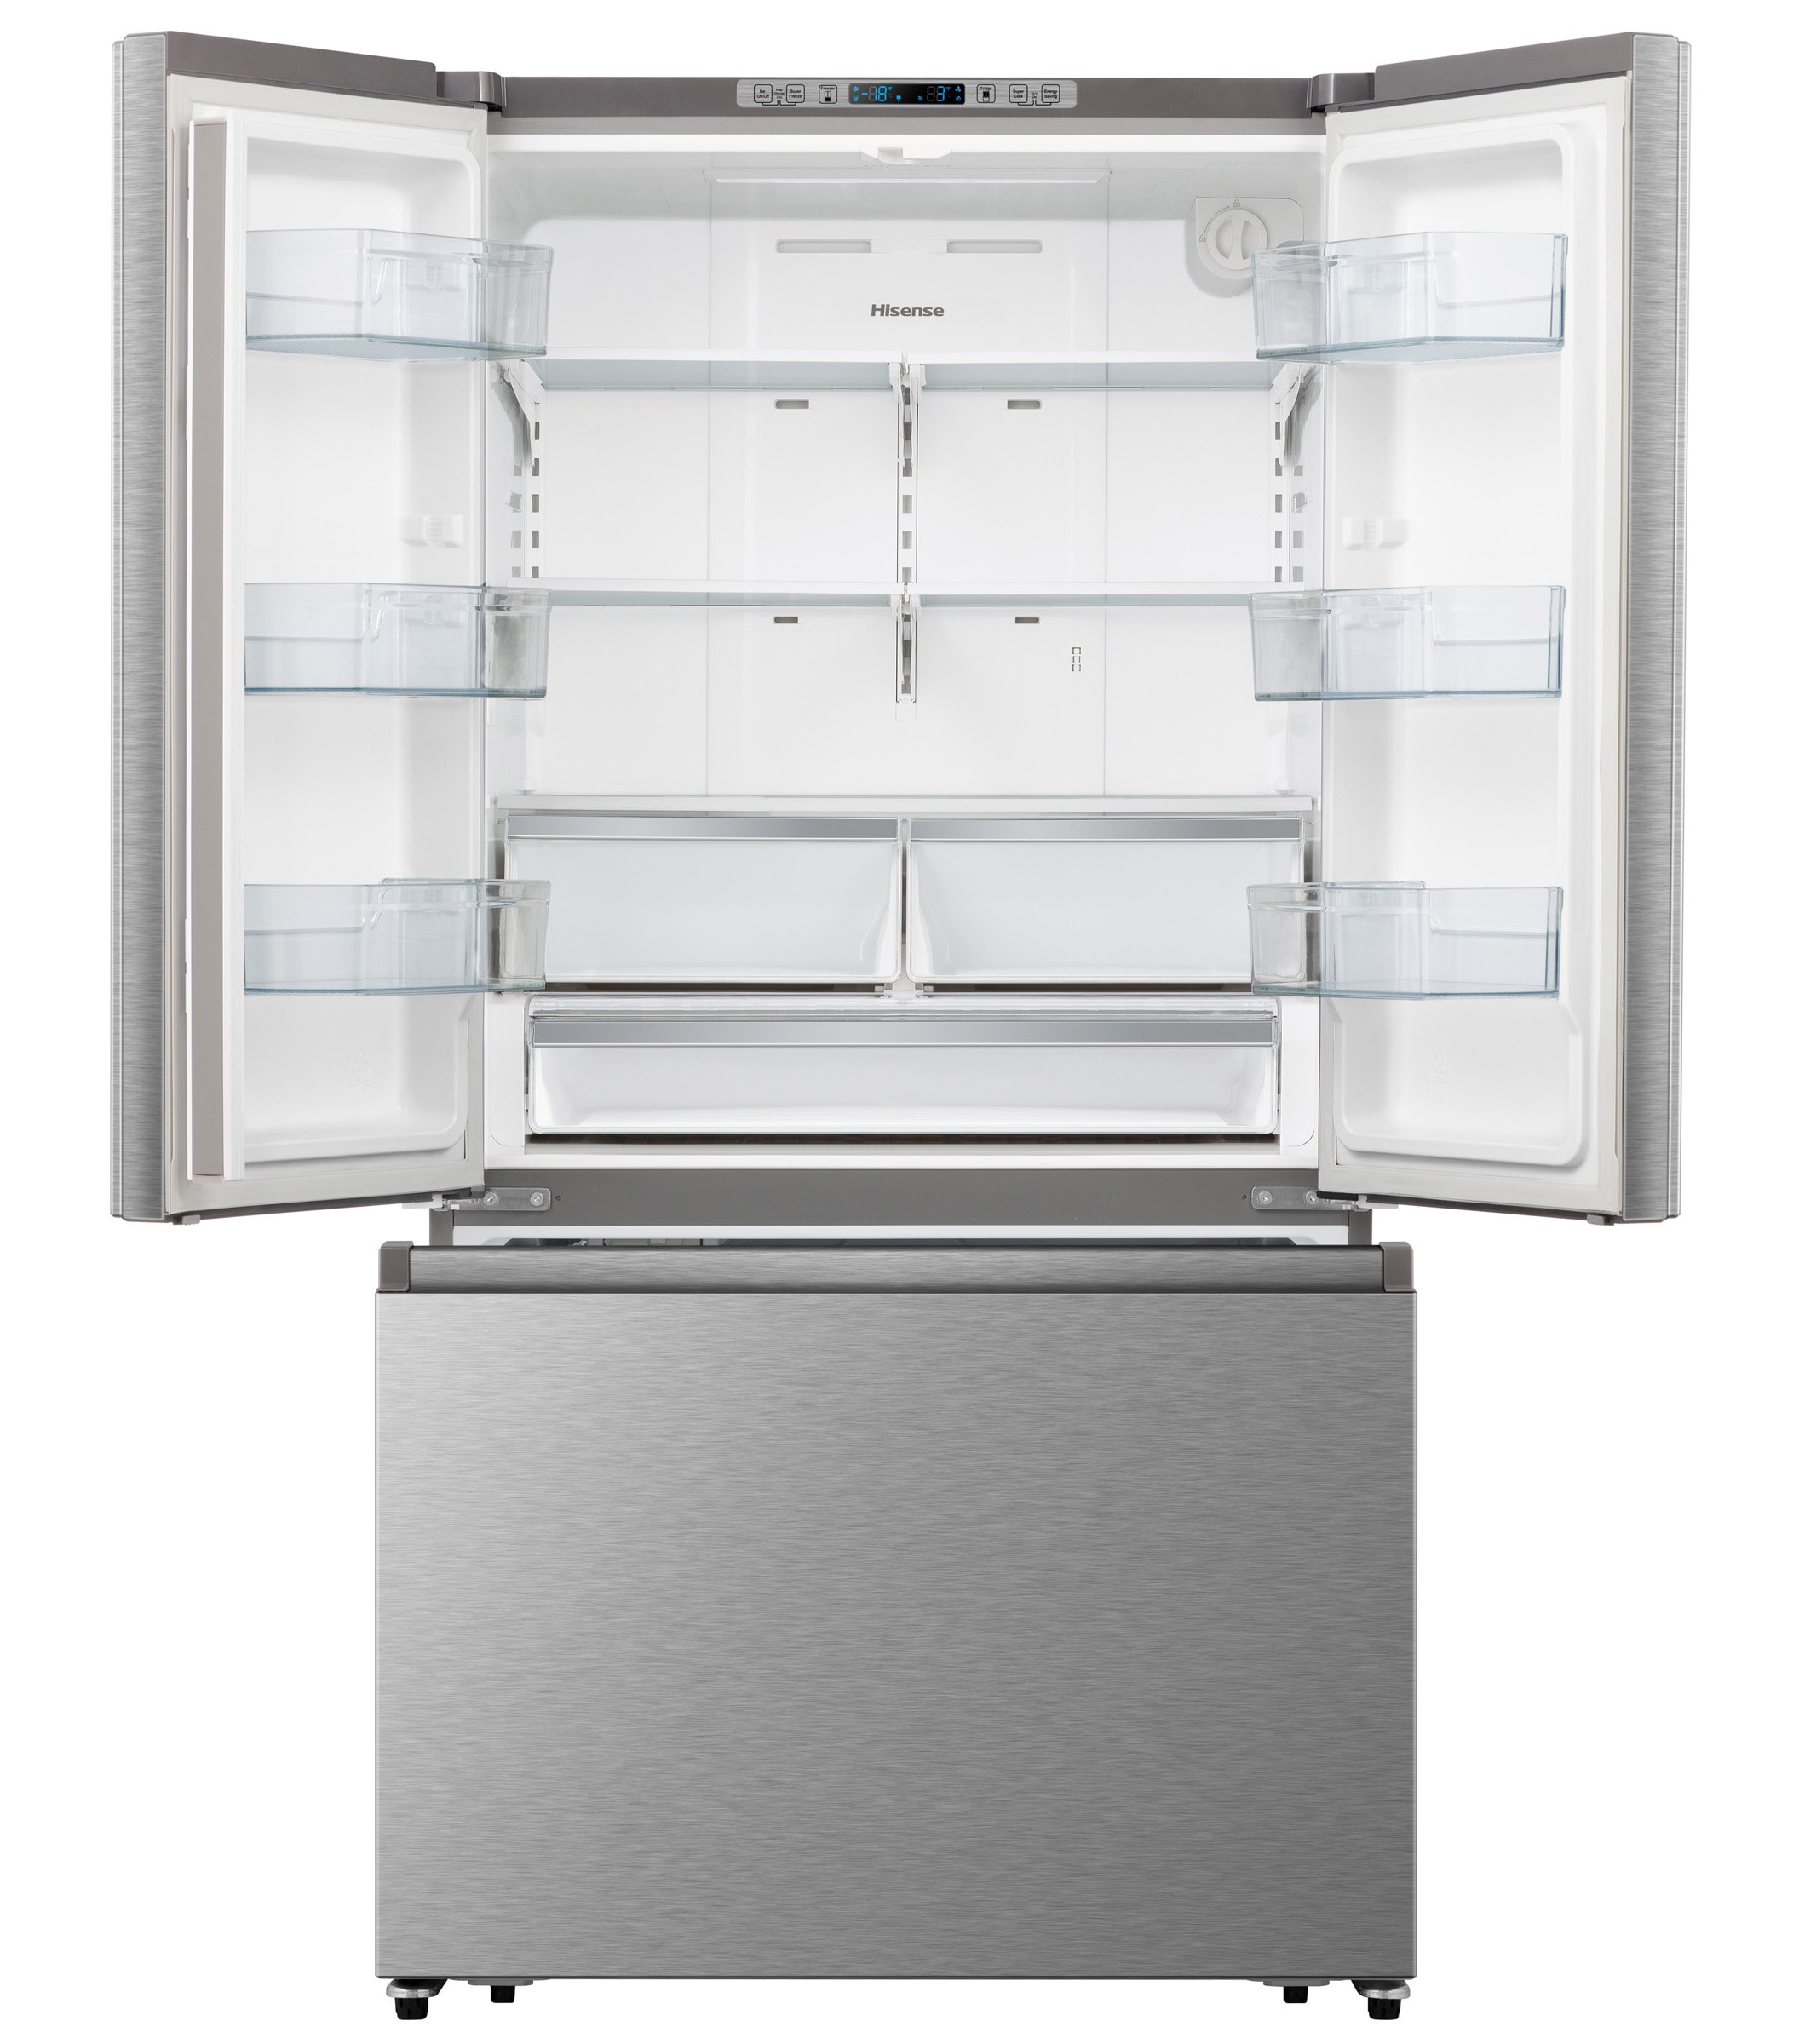 Hisense 20.9-cu ft Bottom-Freezer Refrigerator with Ice Maker (Stainless  Steel) ENERGY STAR (HRB208N6BSE) - Hisense USA